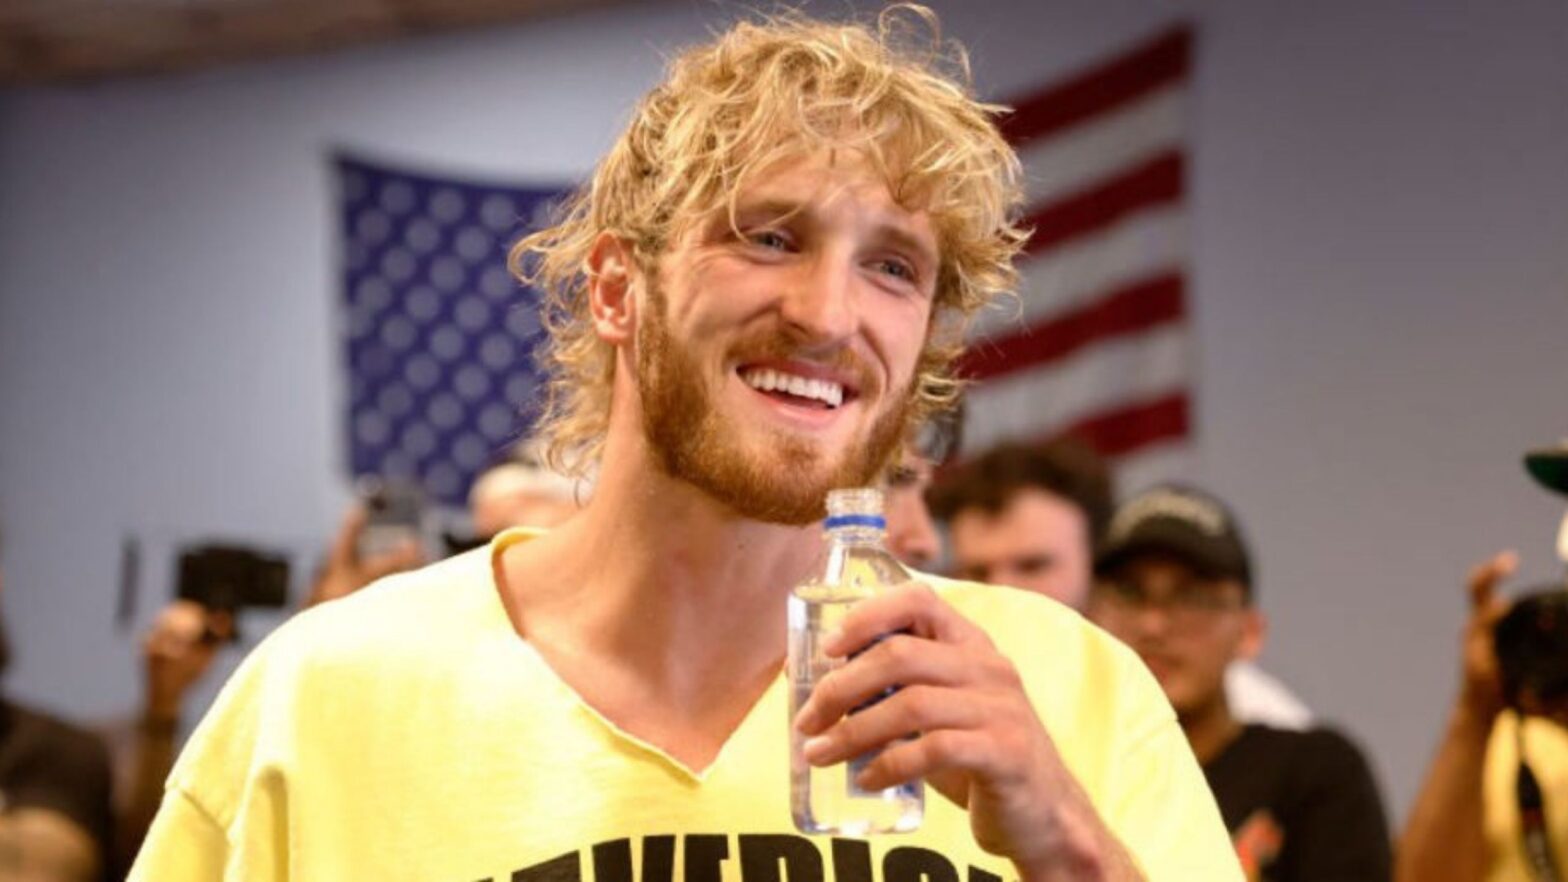 Logan Paul And KSI Team Up To Start Sports Hydration Drink Company “Prime Hydration”, Know How To Buy It, Price